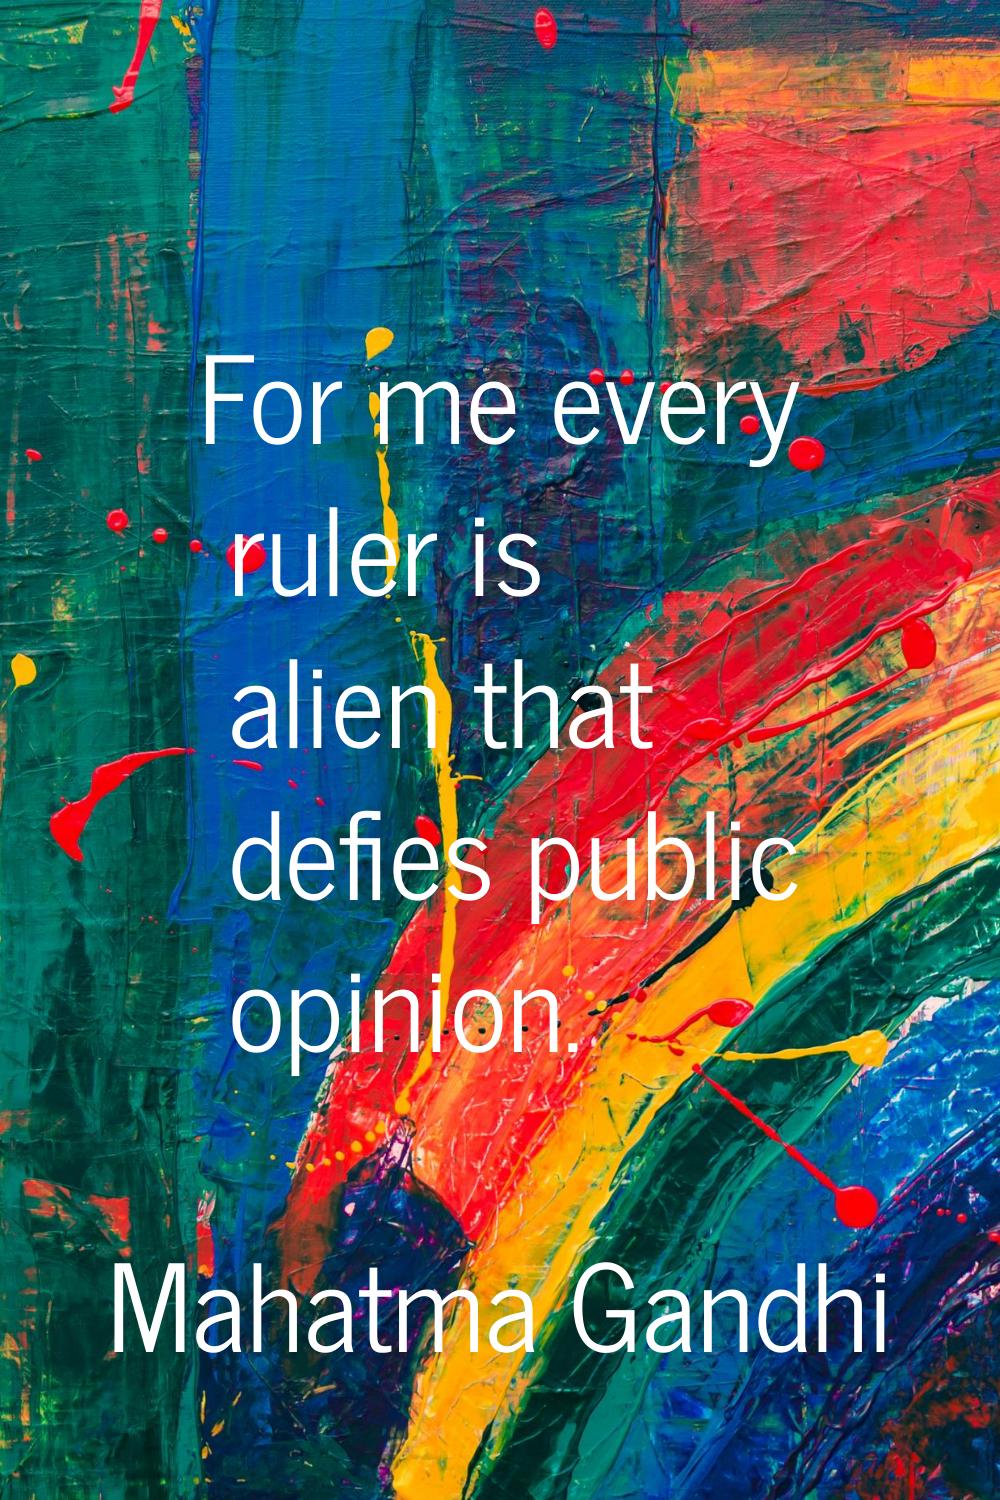 For me every ruler is alien that defies public opinion.